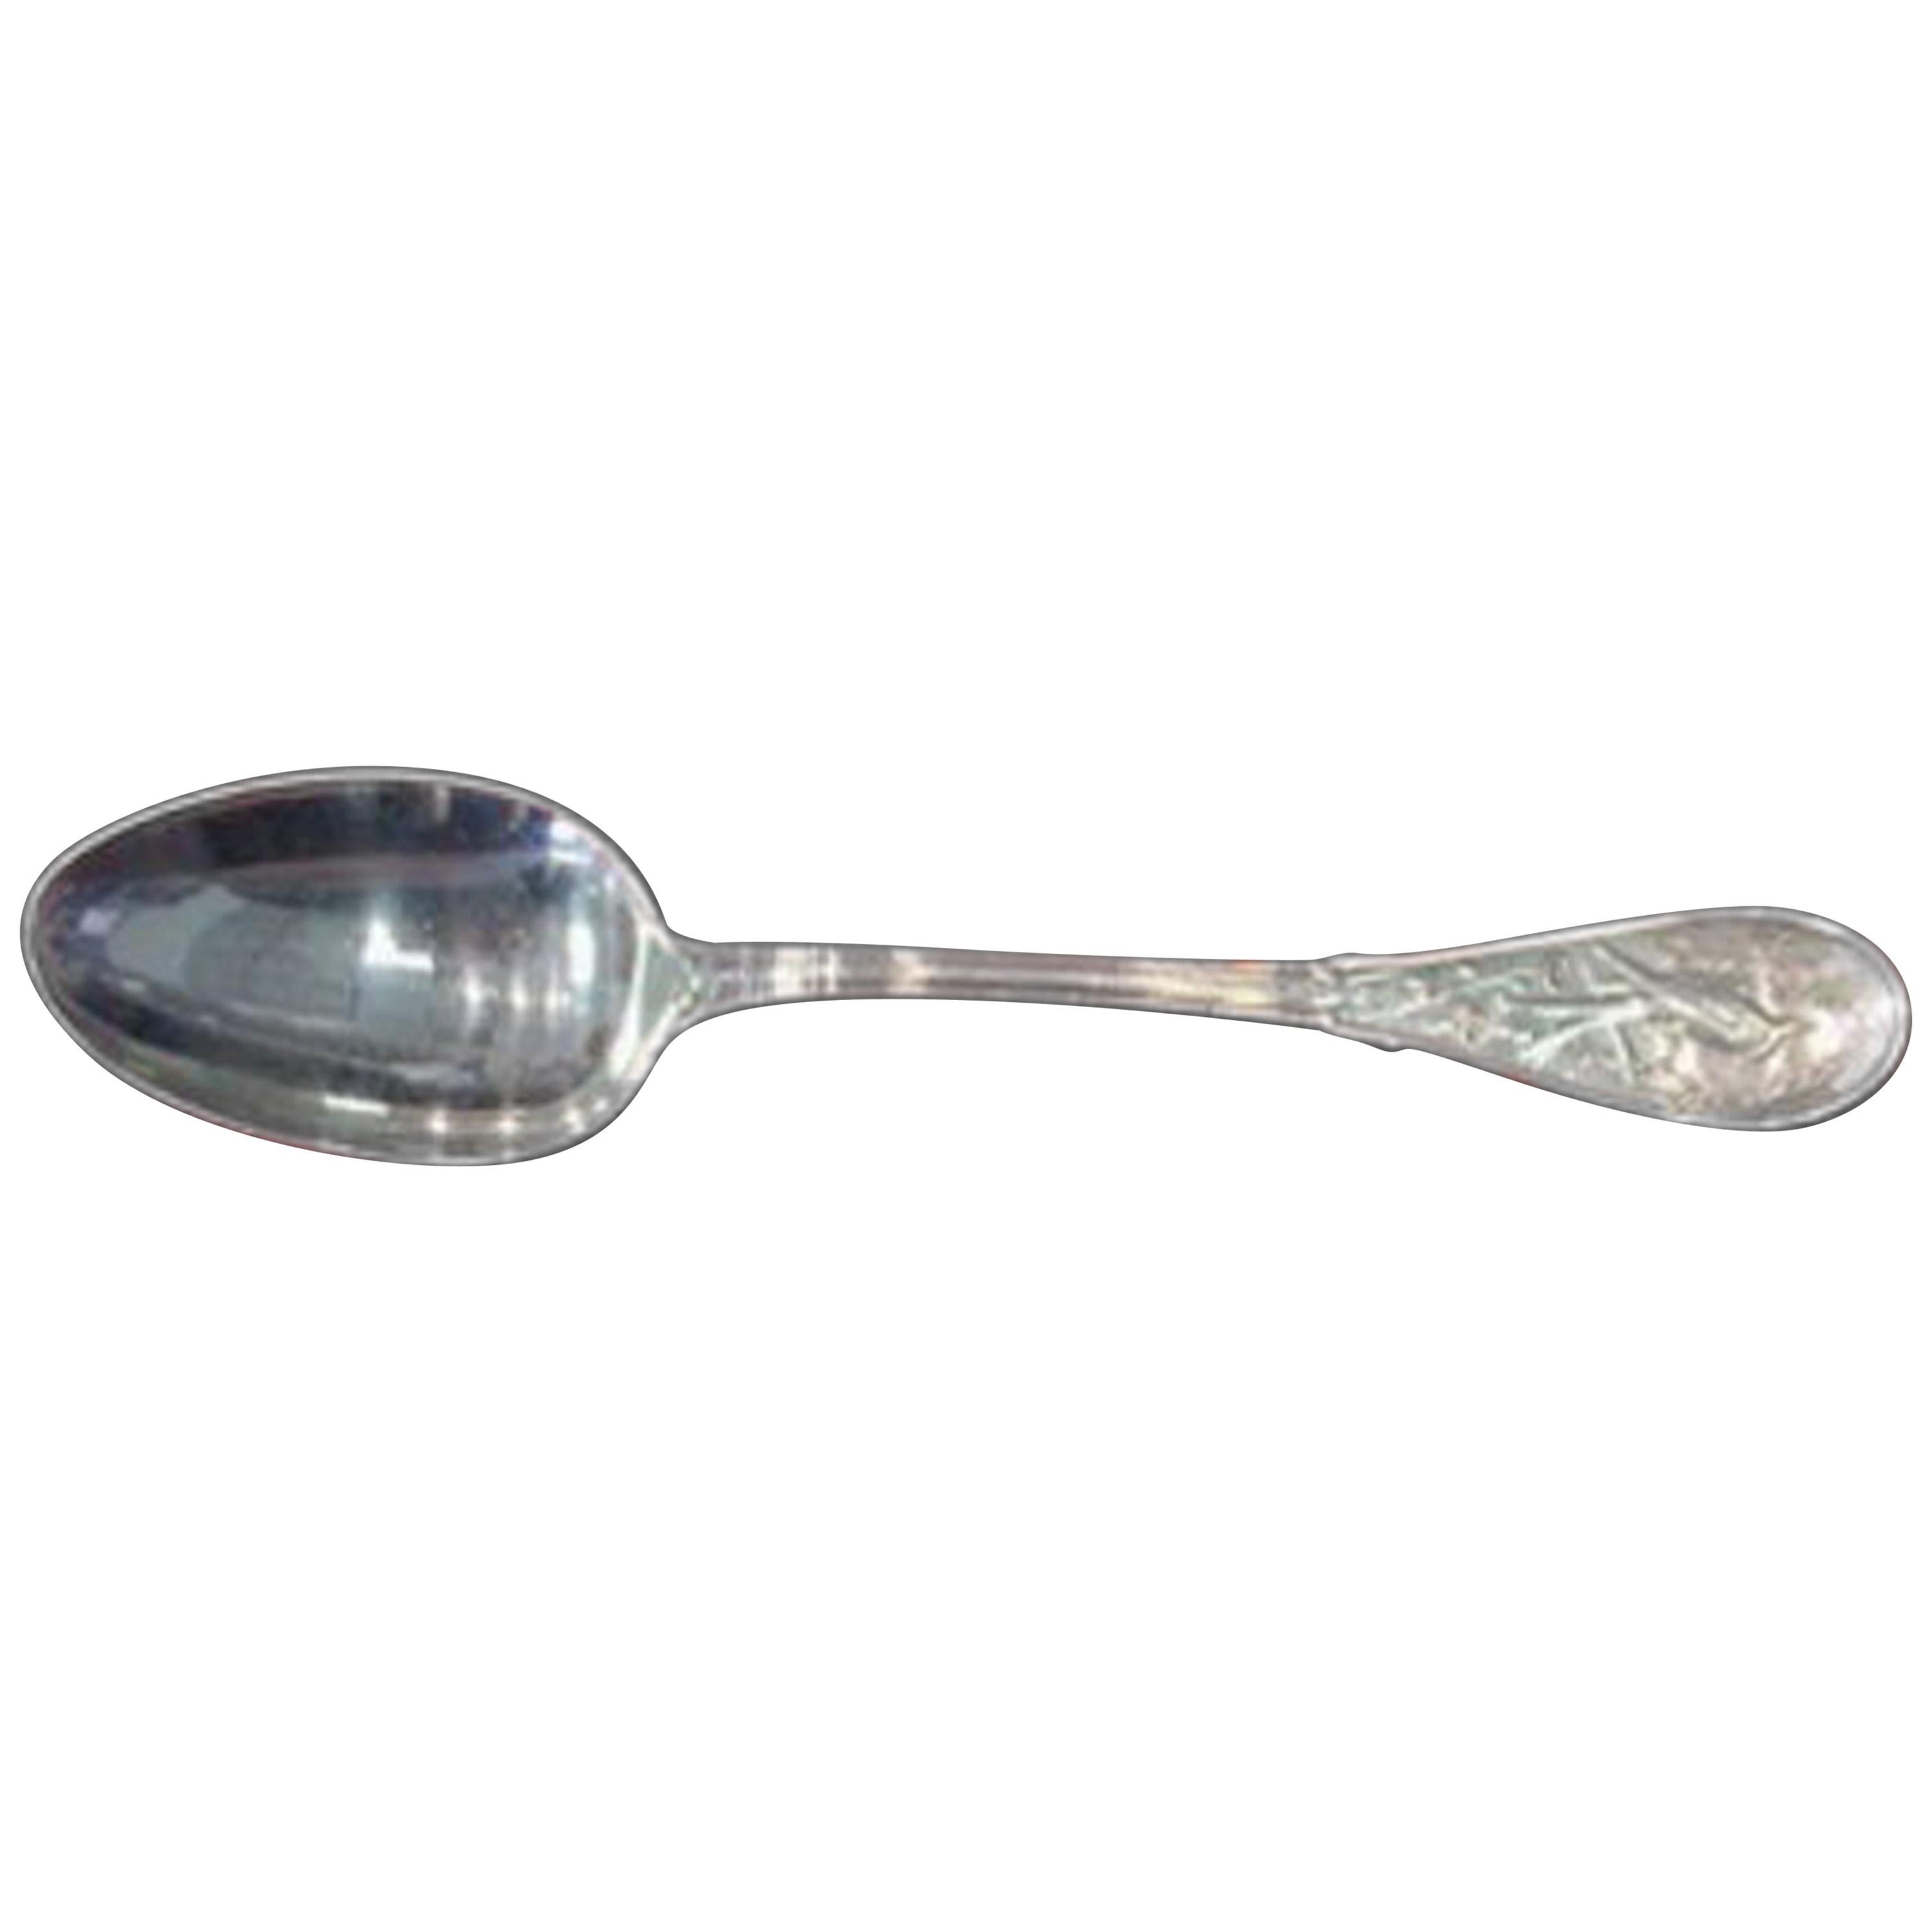 Japanese by Tiffany & Co. Sterling Silver Serving Spoon Antique